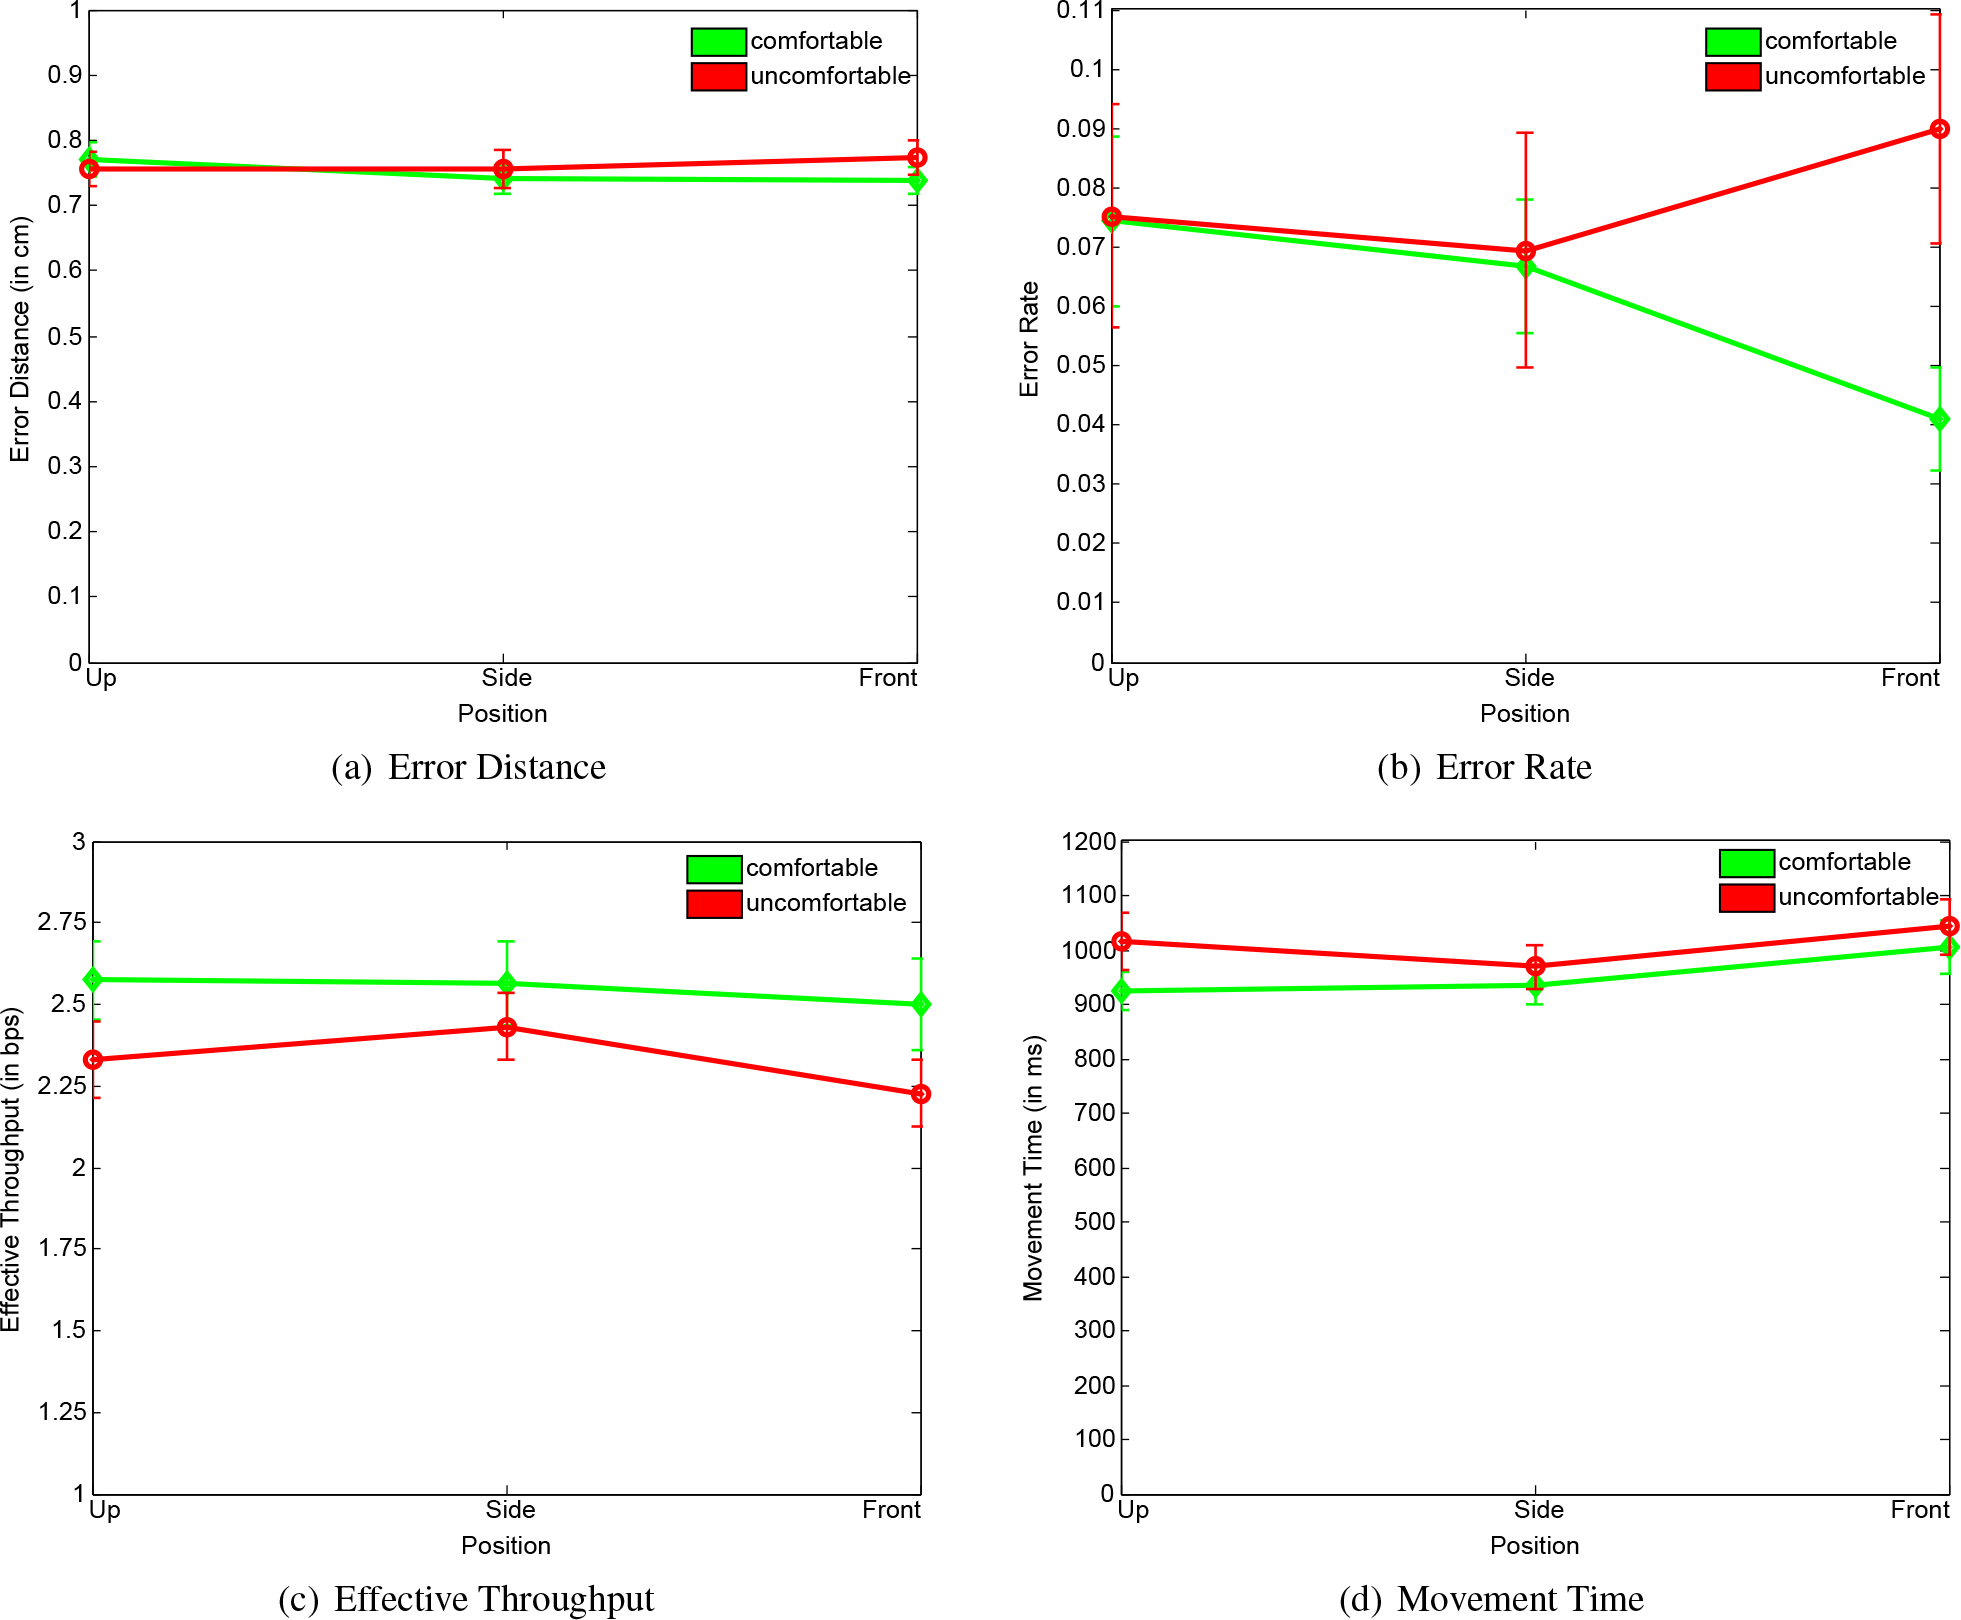 Plots of the experiment's results. The x-axis show the interaction positions and the y-axis the a) error distances in cm, b) error rate, c) effective throughput in bits per second (bps) and d) the movement time in ms. The green lines show the comfortable pose. The red lines show the uncomfortable pose